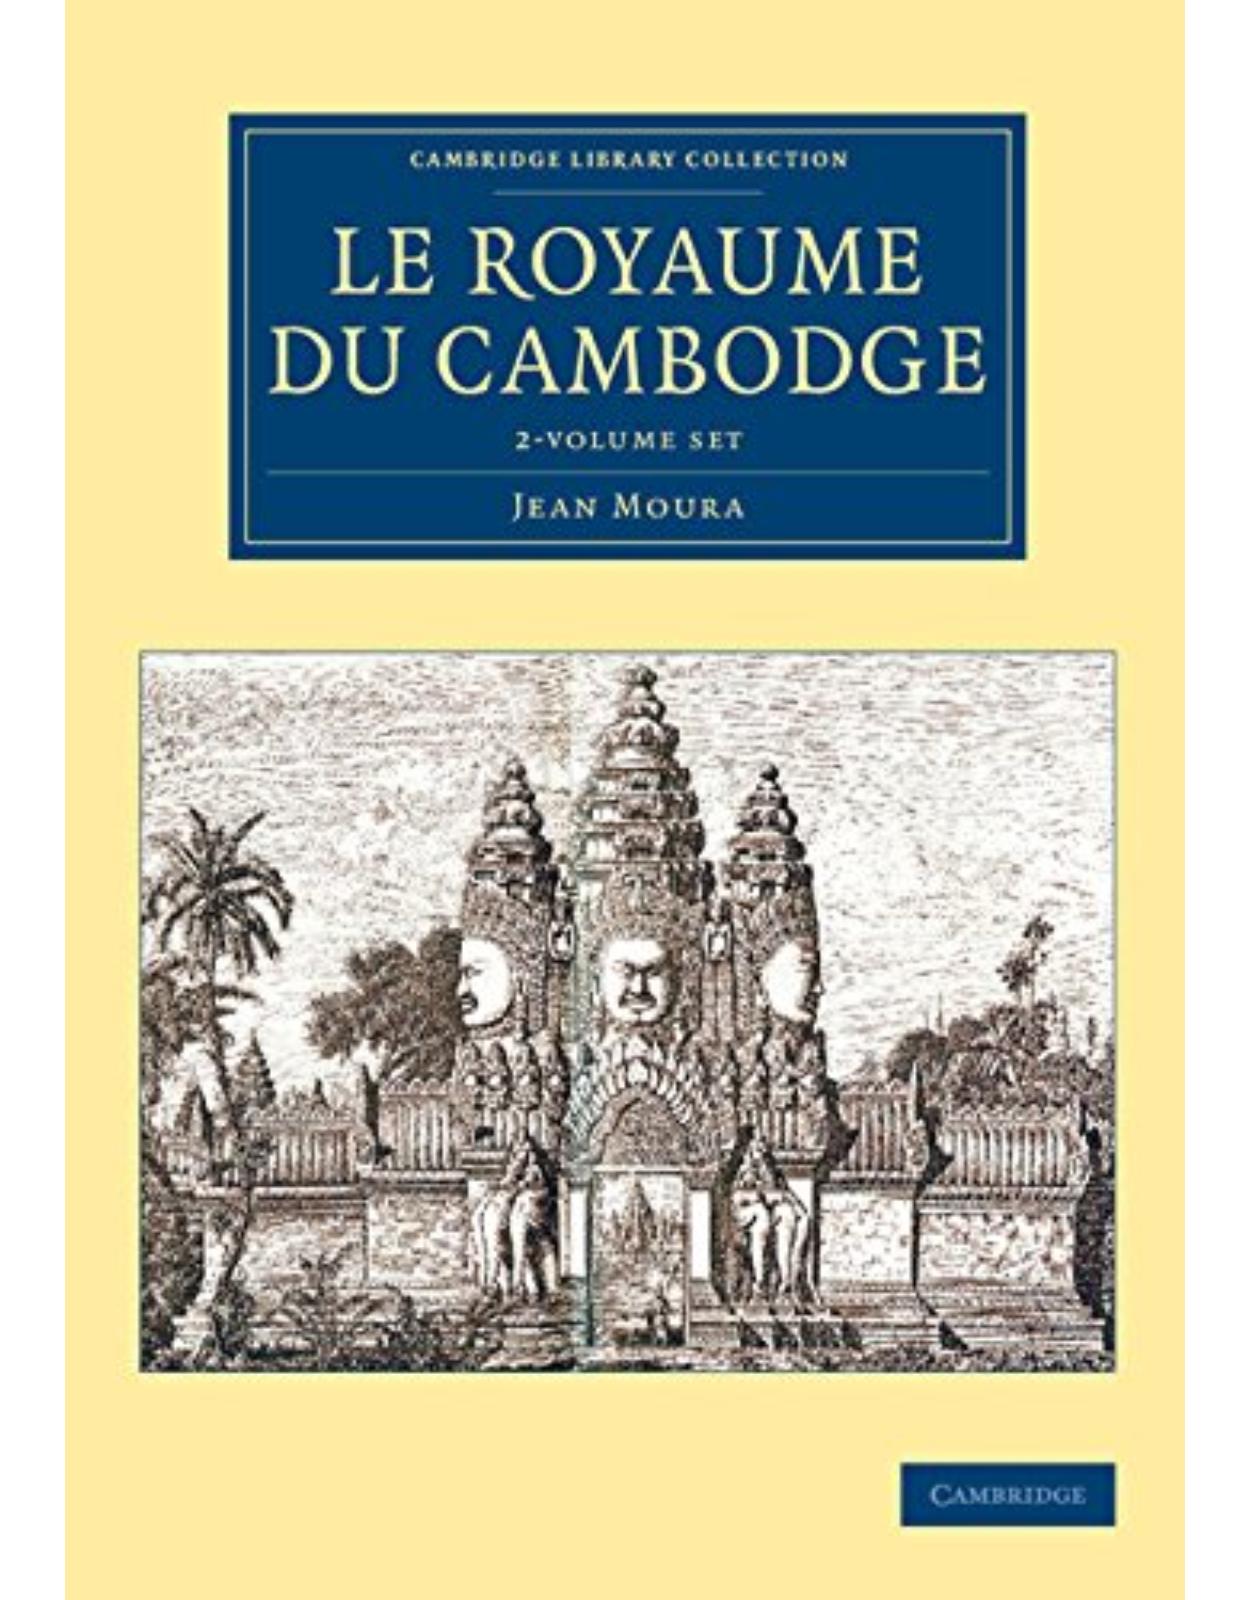 Le Royaume du Cambodge 2 Volume Set (Cambridge Library Collection - East and South-East Asian History) 